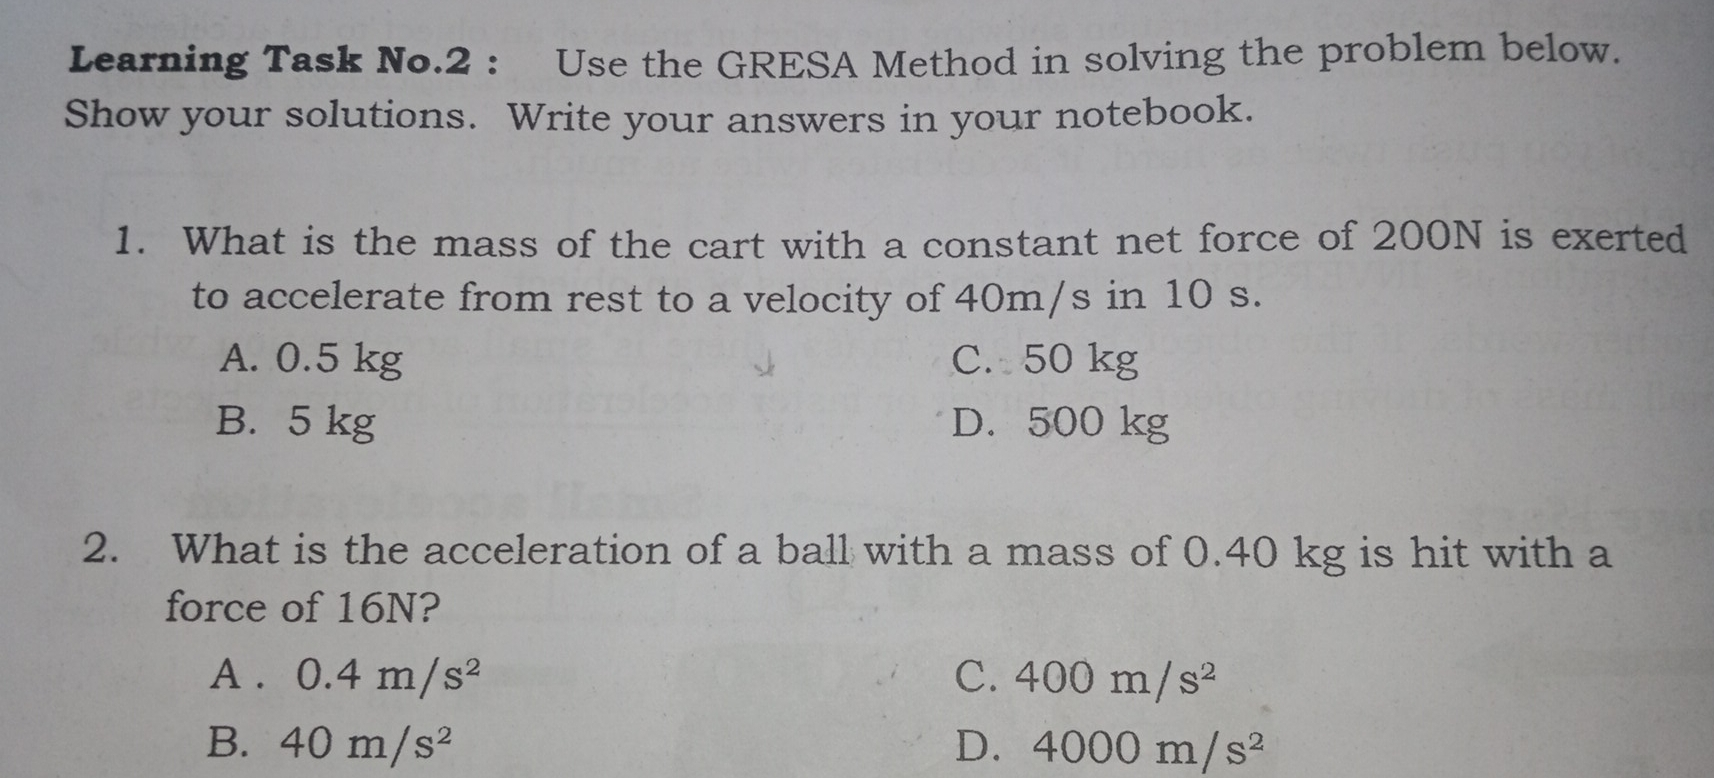 Learning Task No.2 : Use the GRESA Method in solving the problem below. Show your solutions. Write your answers in your notebook. 1. What is the mass of the cart with a constant net force of 200N is exerted to accelerate from rest to a velocity of 40m/s in 10 s. A. 0.5 kg C. 50 kg B. 5 kg D. 500 kg 2. What is the acceleration of a ball with a mass of 0.40 kg is hit with a force of 16N? A. 0.4m/s2 C. 400m/s2 B. 40m/s2 D. 4000m/s2